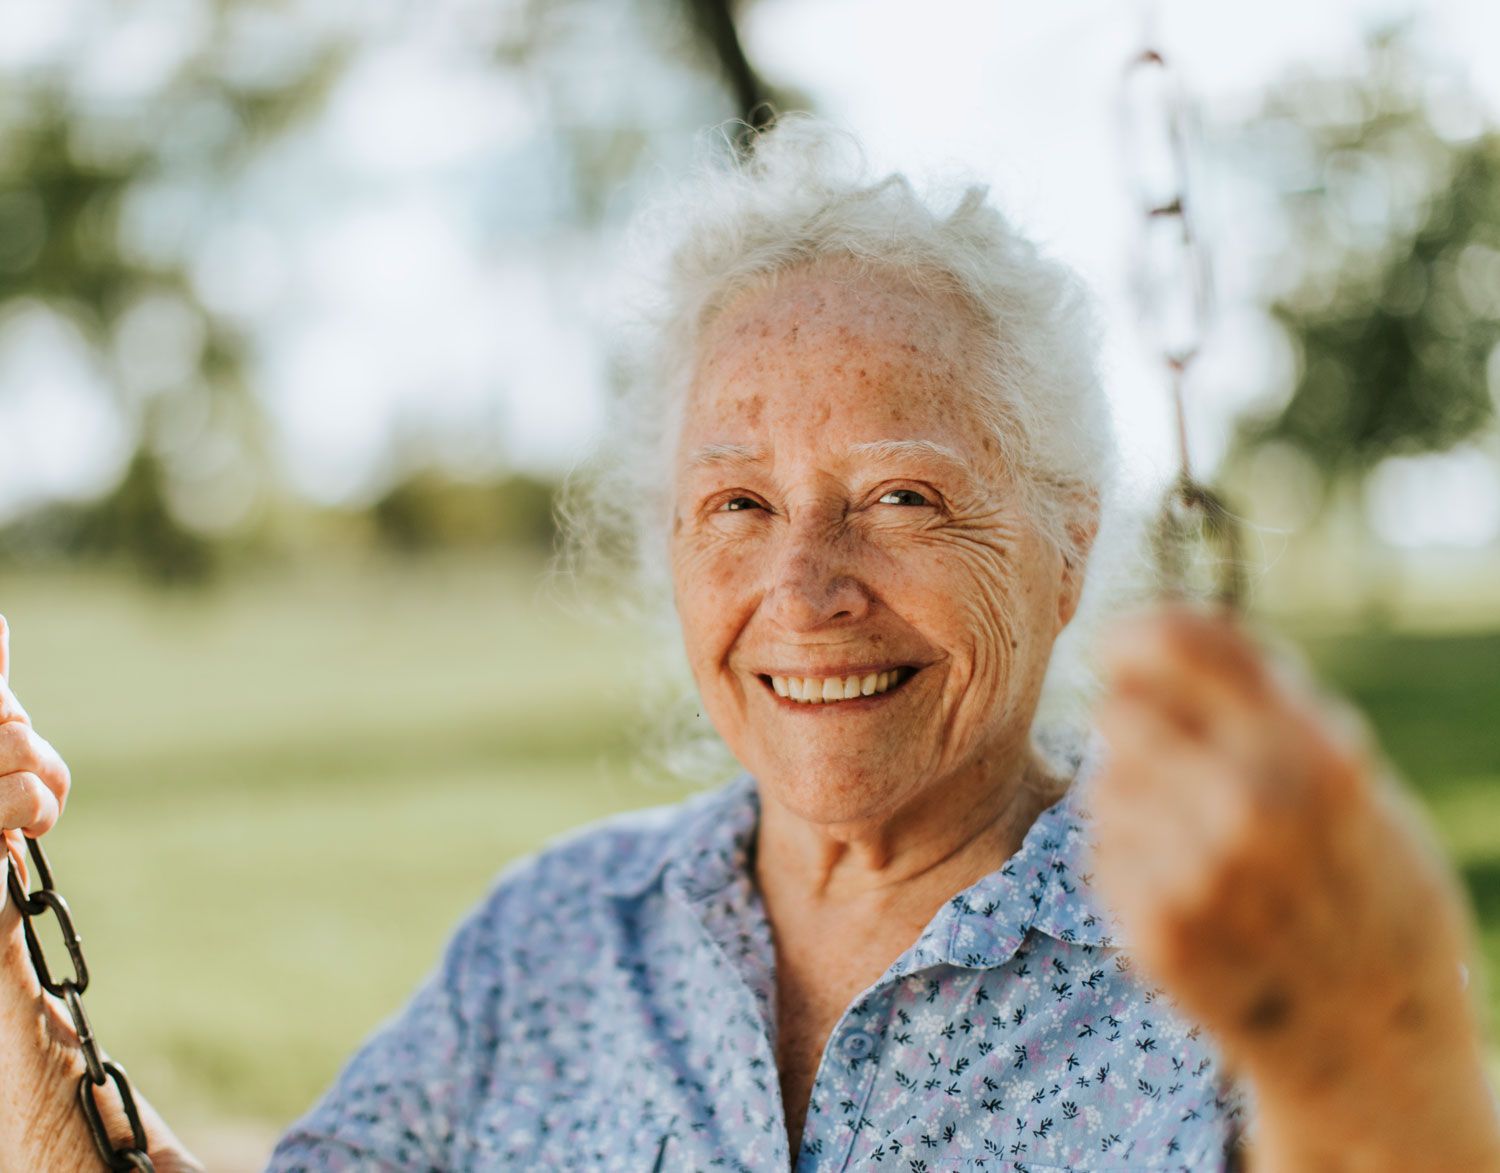 Elderly Woman on sitting on a swing smiling